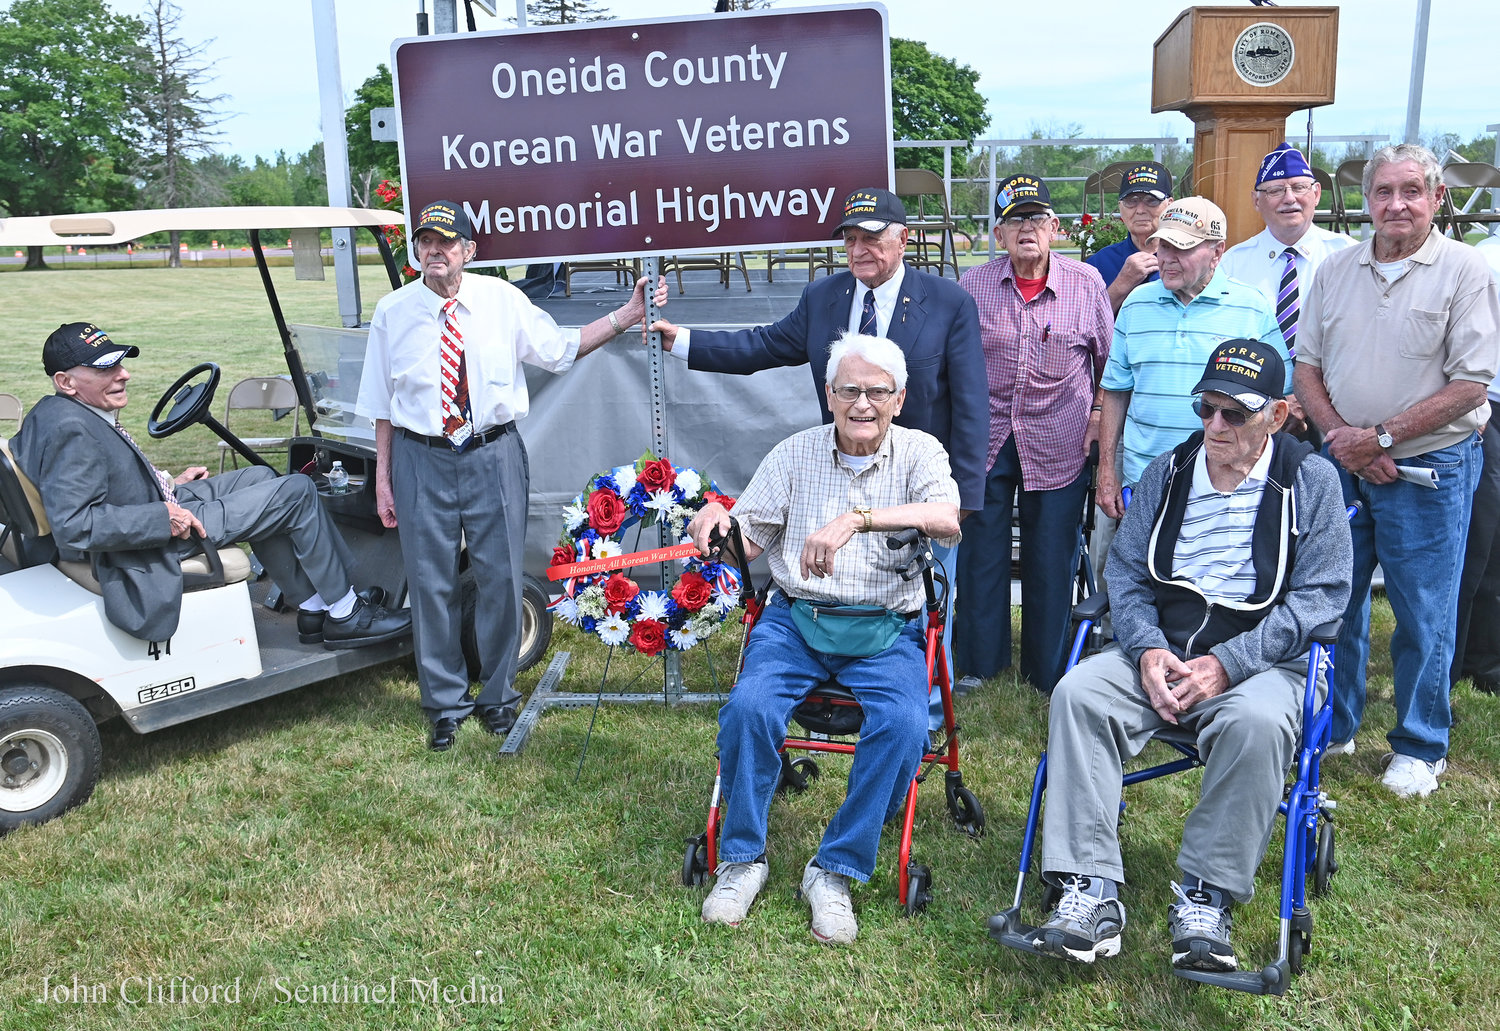 Pictured are Korean War veterans with the new road marker.